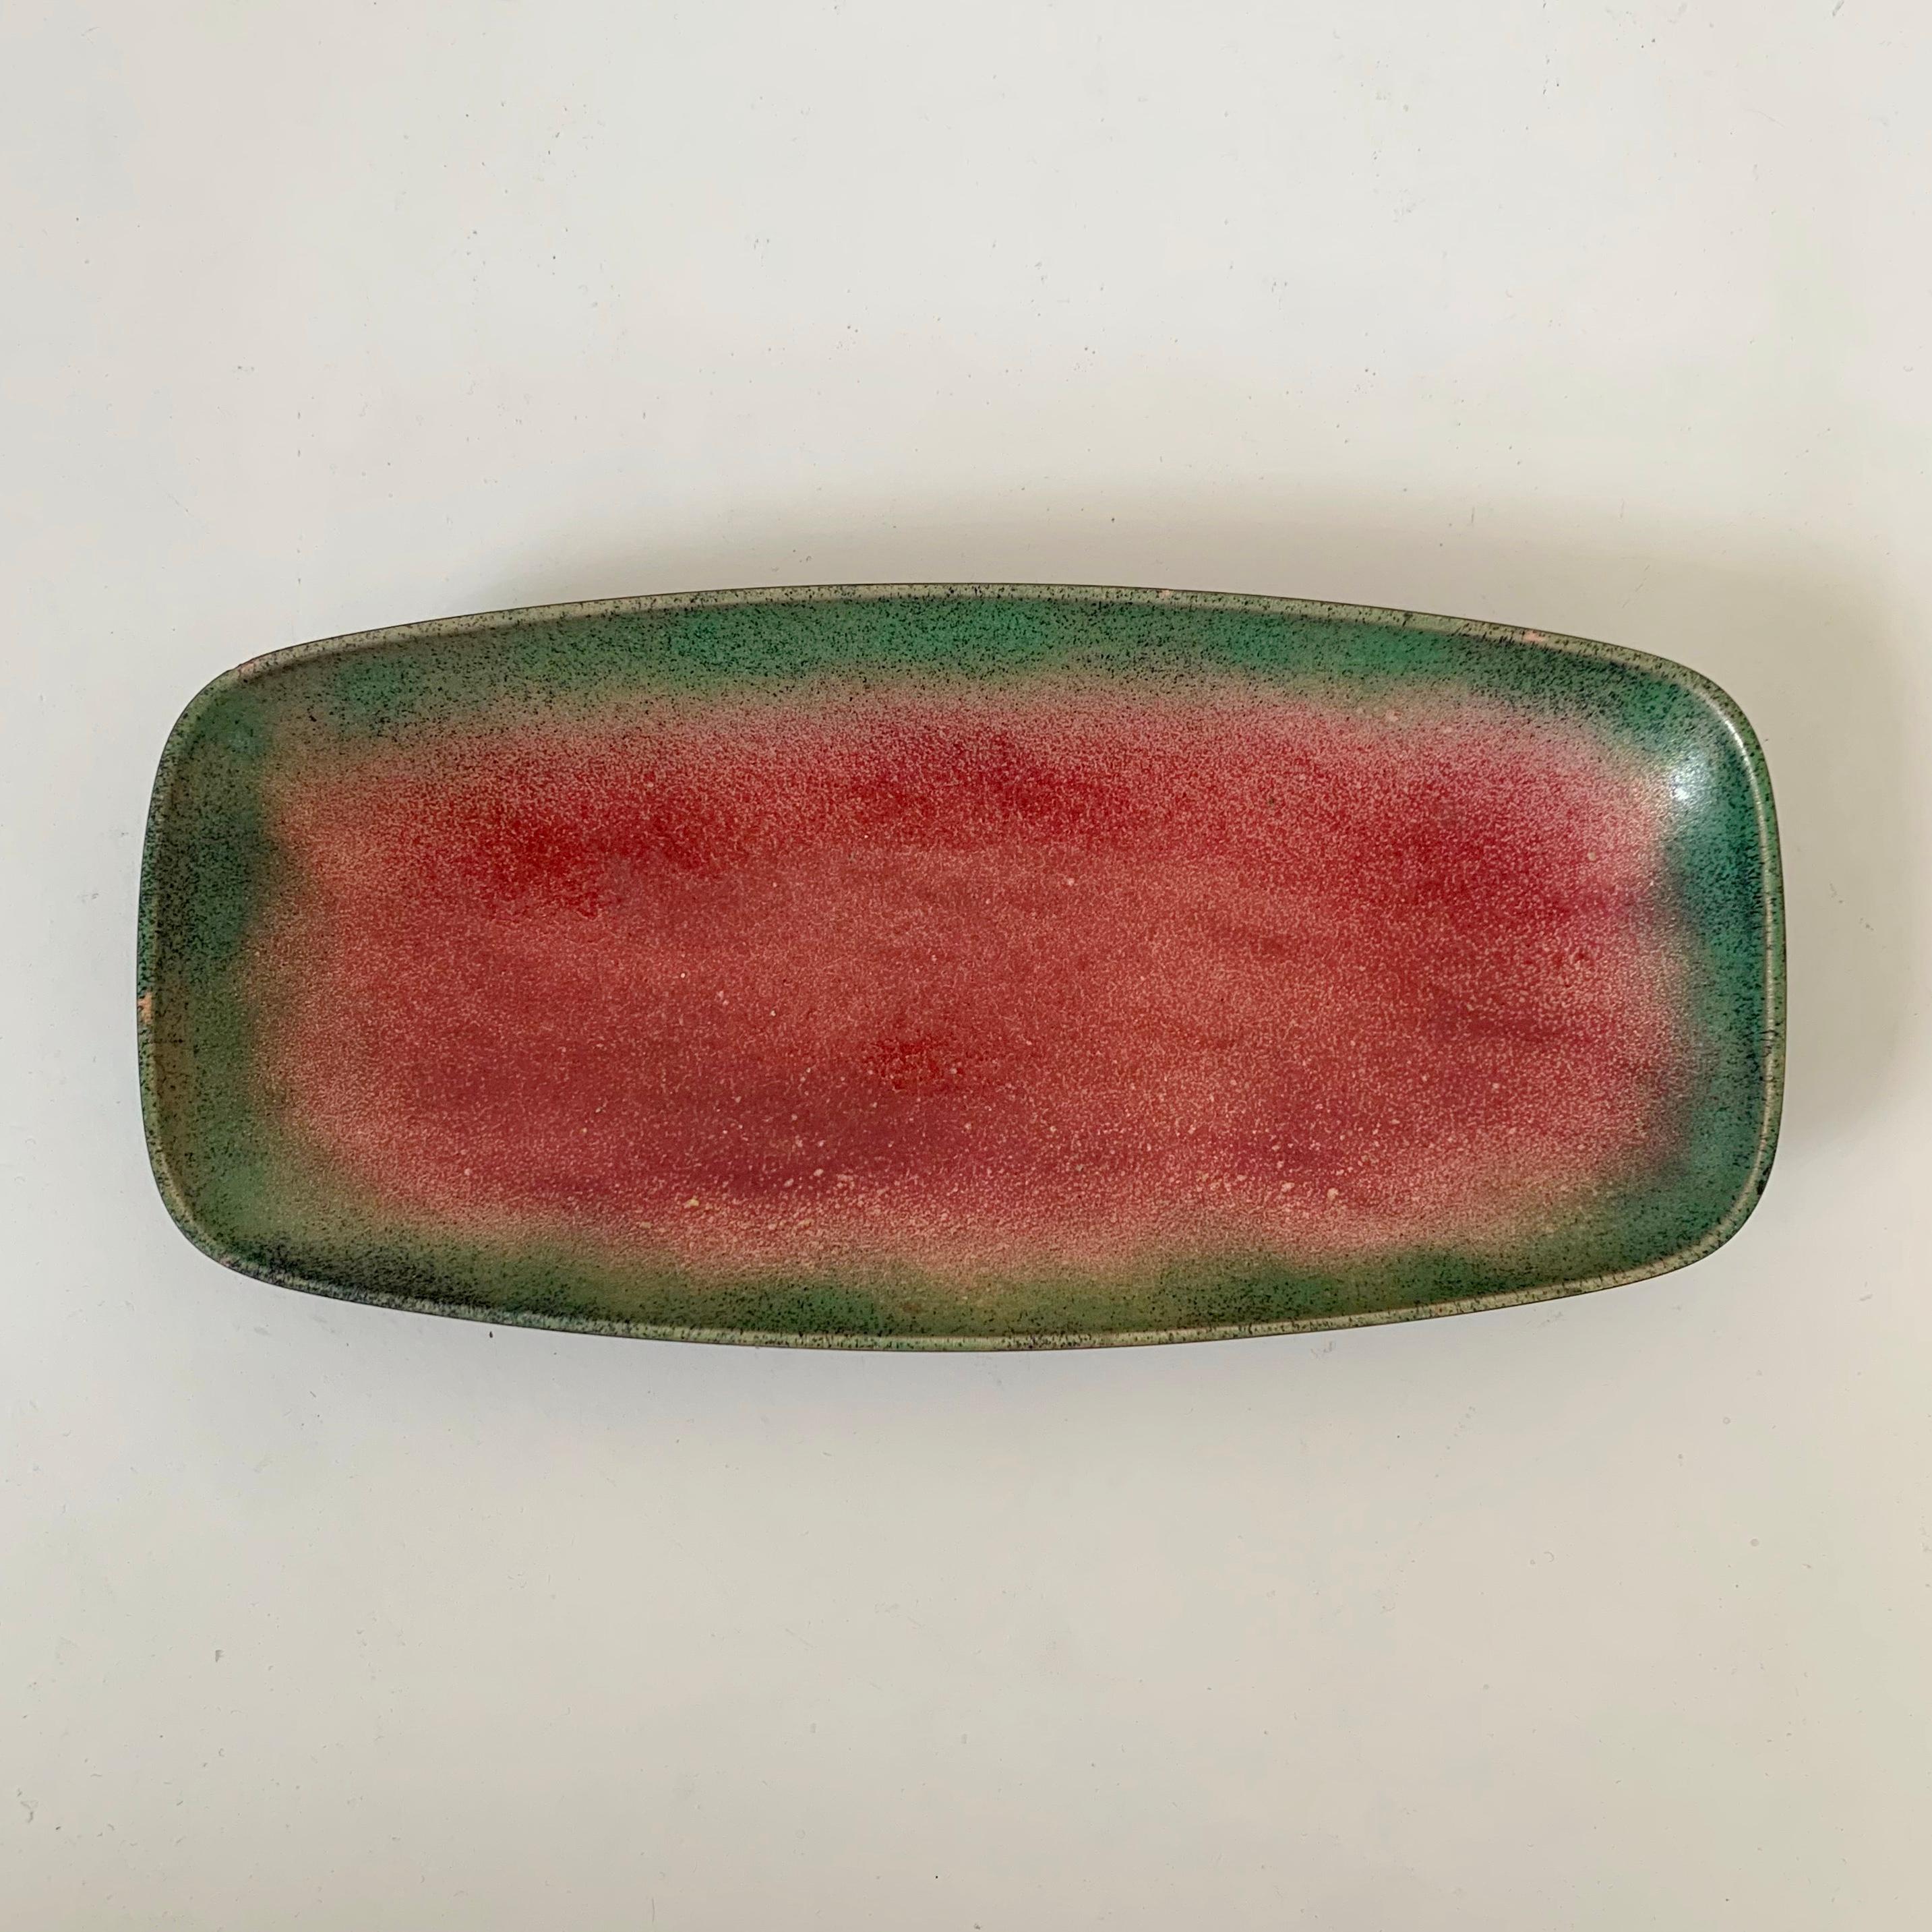 Nice Paolo De Poli attributed large vide- poche or platter, circa 1950, Italy.
Enameled copper. Black on the outside, green and pinkish red inside.
Dimensions: 30 cm W, 15 cm D, 3 cm H.
Original vintage condition.
All purchases are covered by our